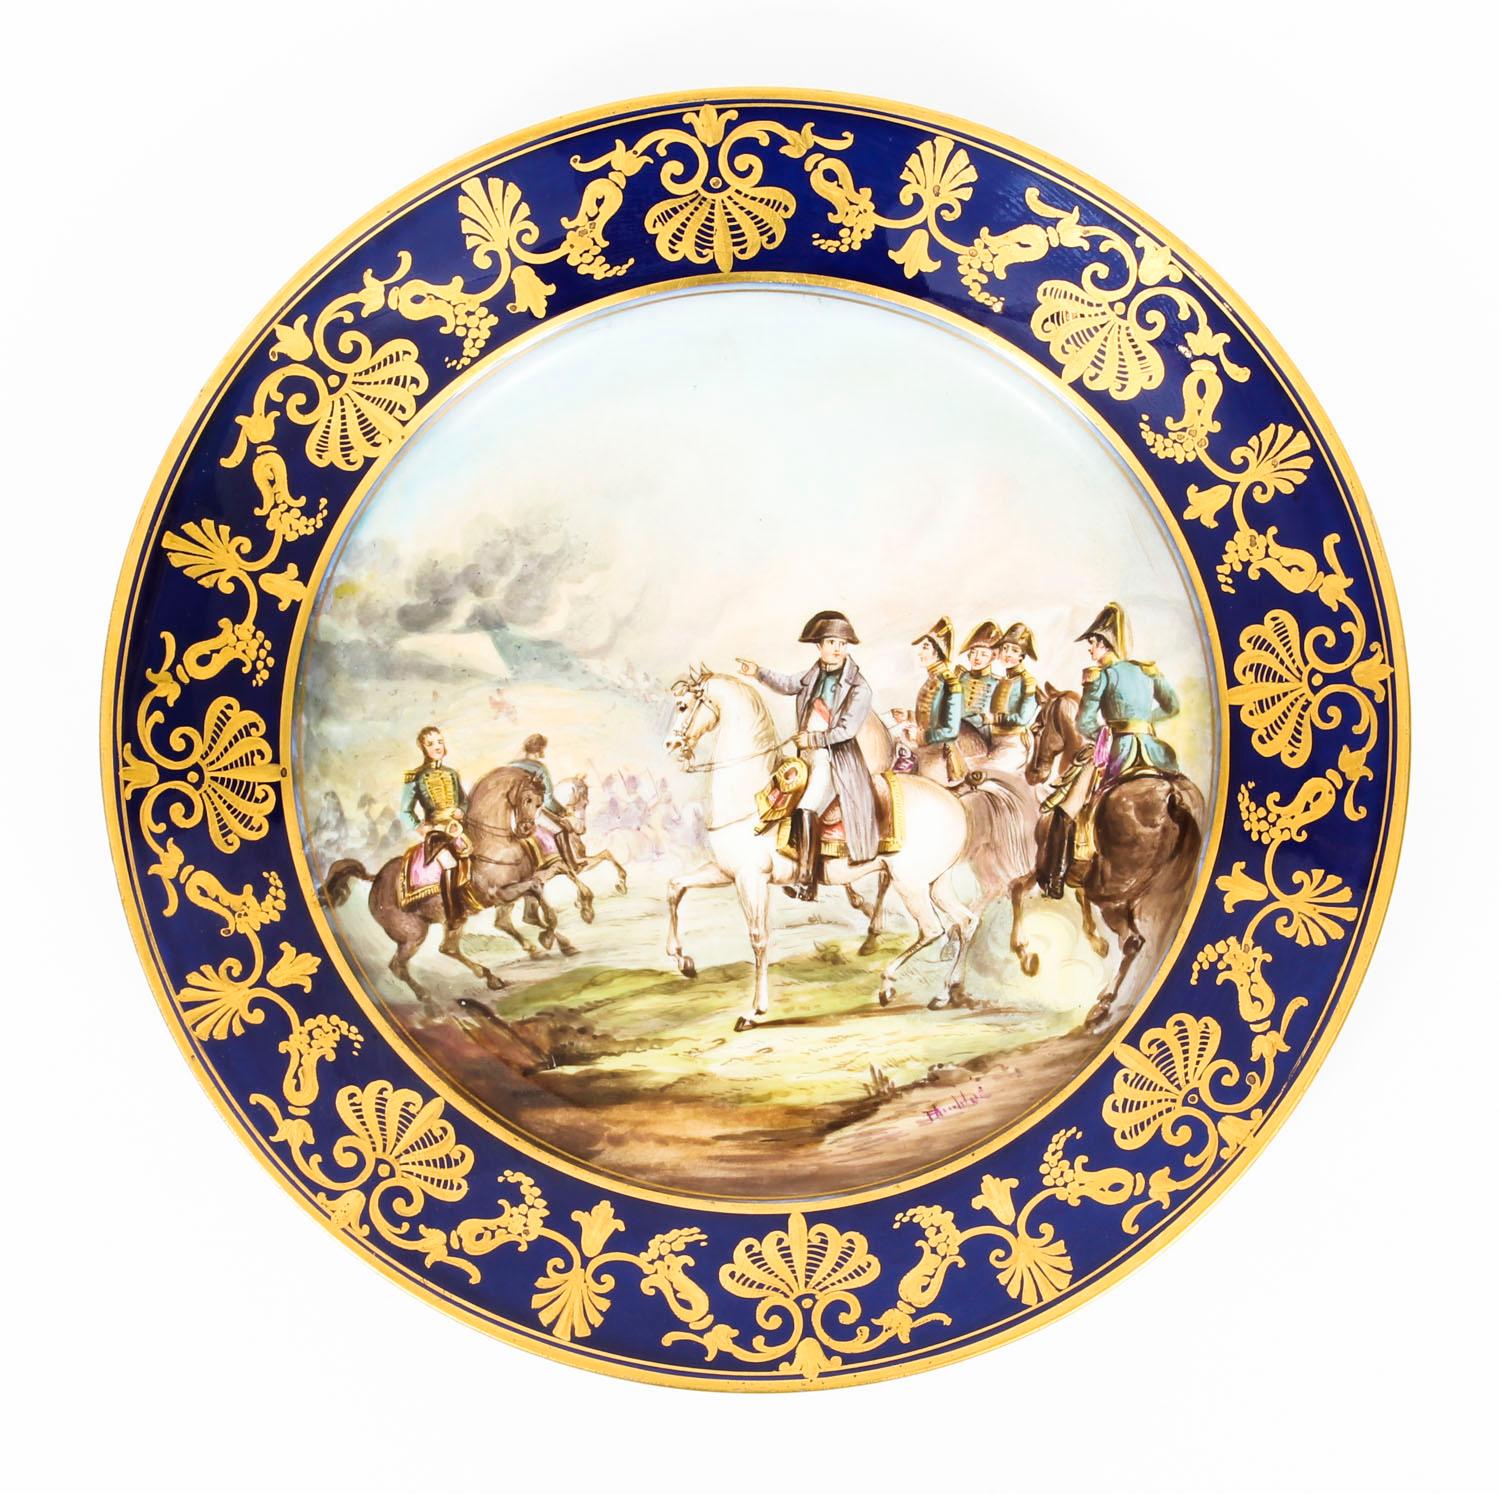 This is an enchanting antique pair of Sevres porcelain cabinet plates, late 19th century in date.

Both are beautifully painted with scenes from the life of Napoleon on the battle field with royal blue borders with classical gilt